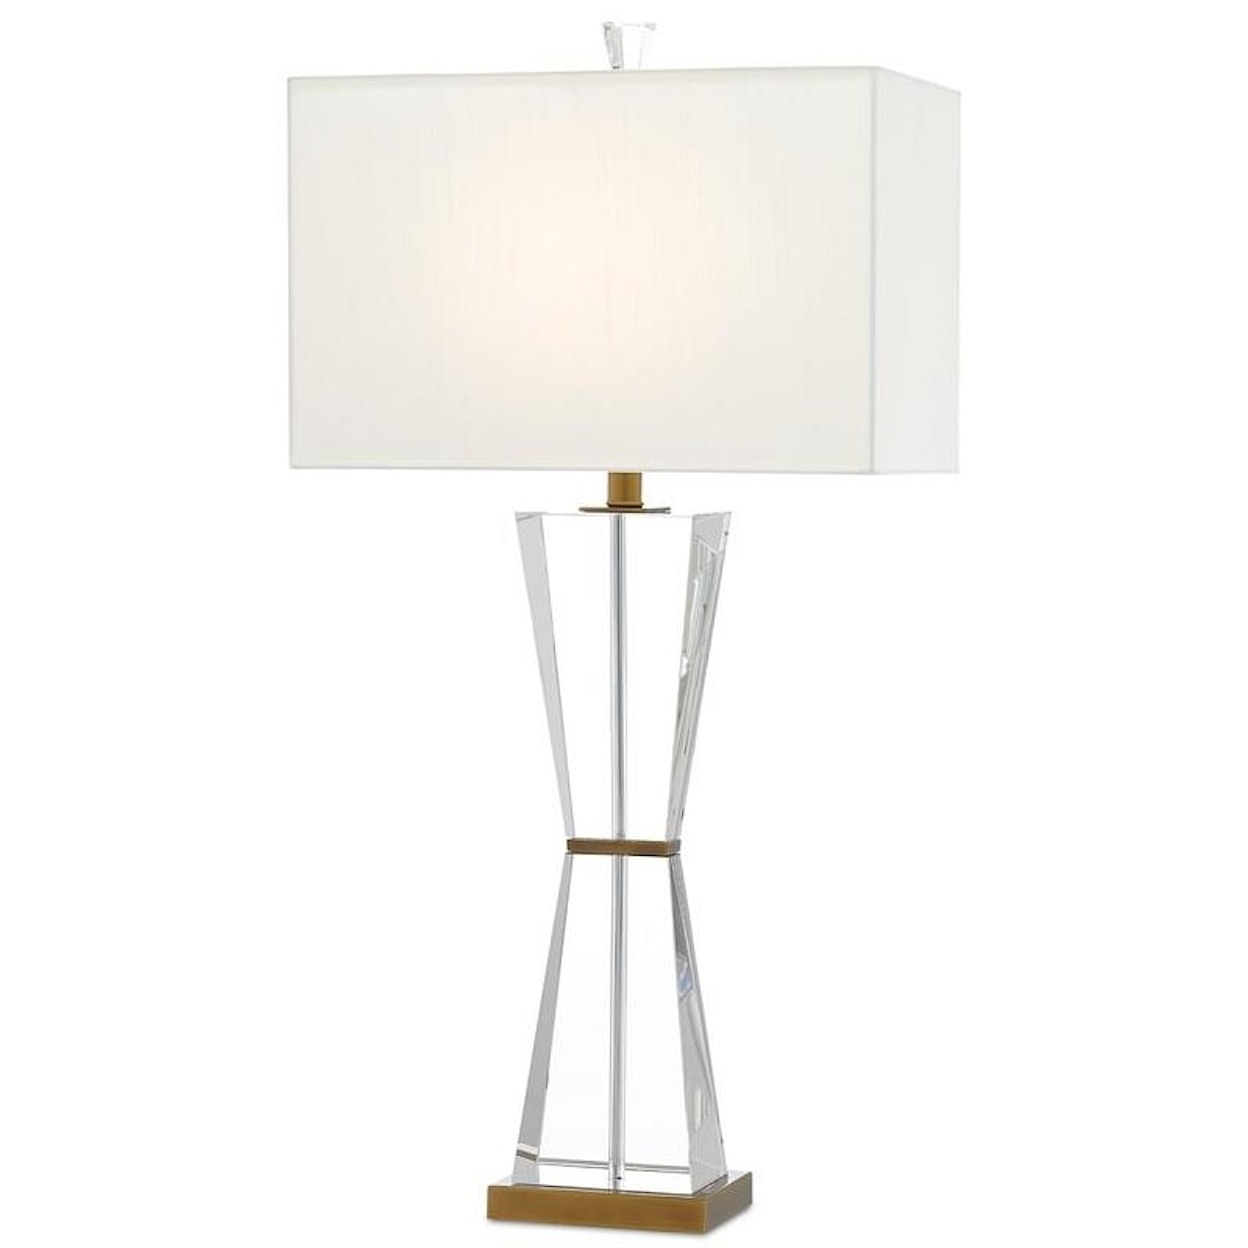 Currey & Co Lighting Table Lamps Laelia Table Lamp